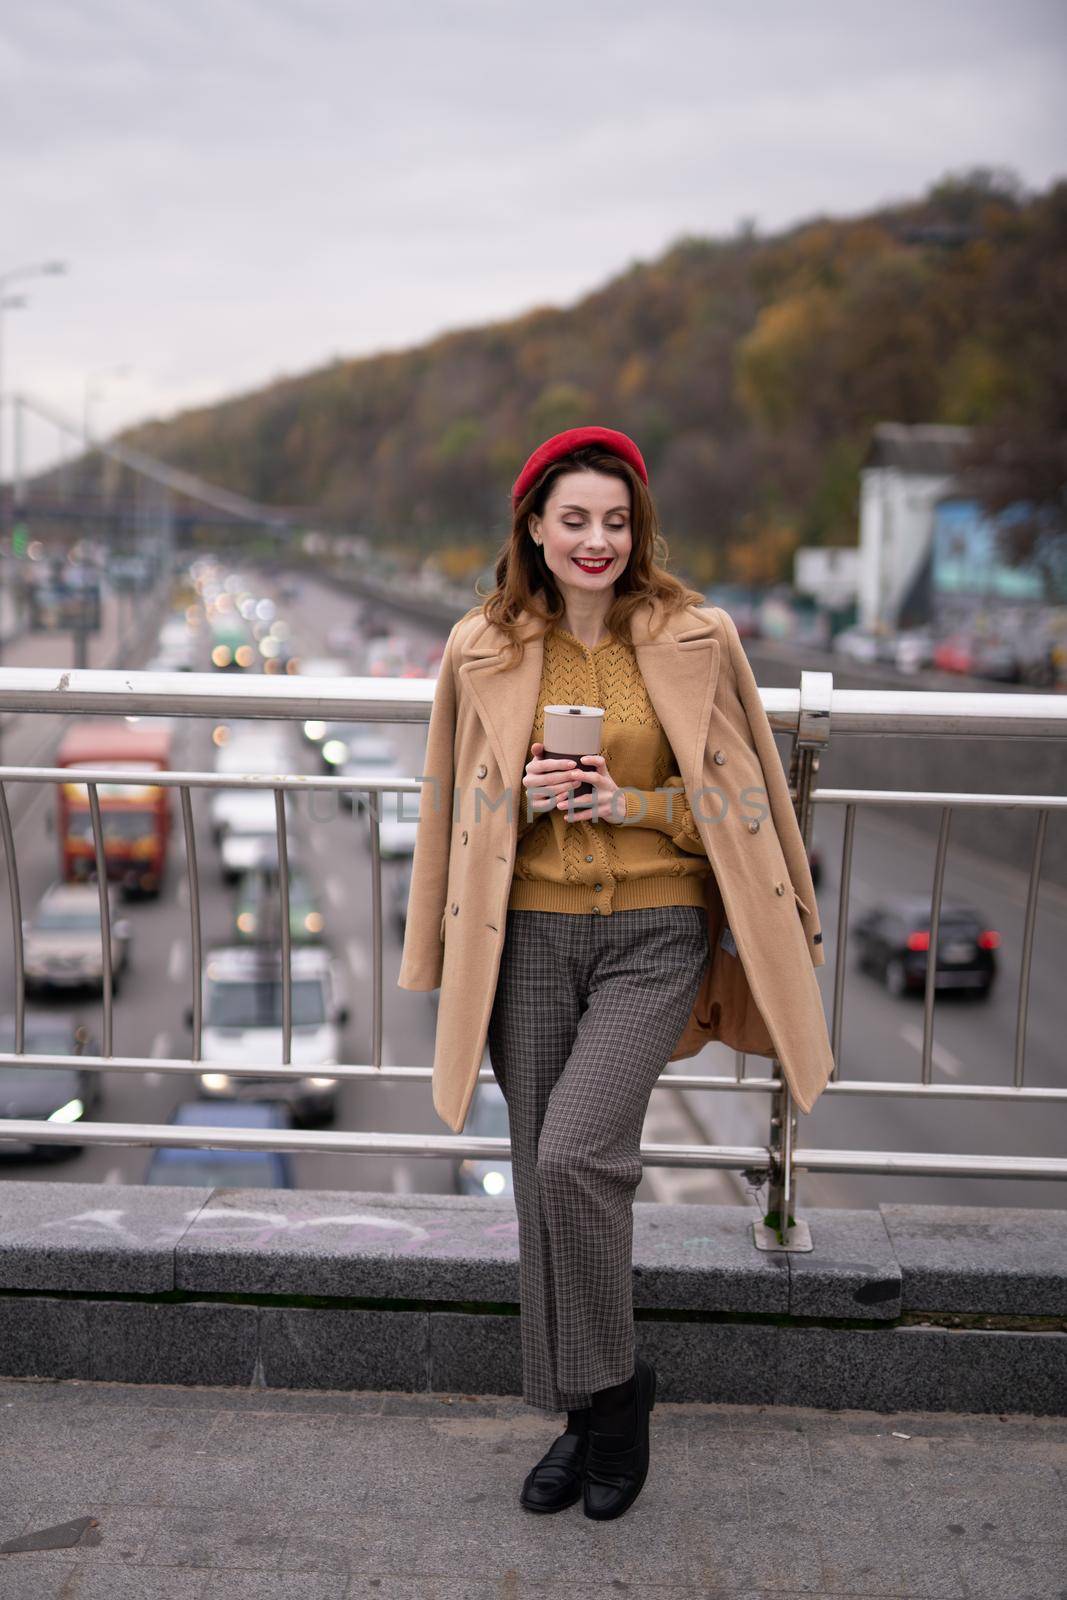 Charming french young woman drinks coffee using a coffee mug looking at camera smiling standing at pedestrian bridge with cars on the road. Looking happy fashion girl in a red beret and beige coat.